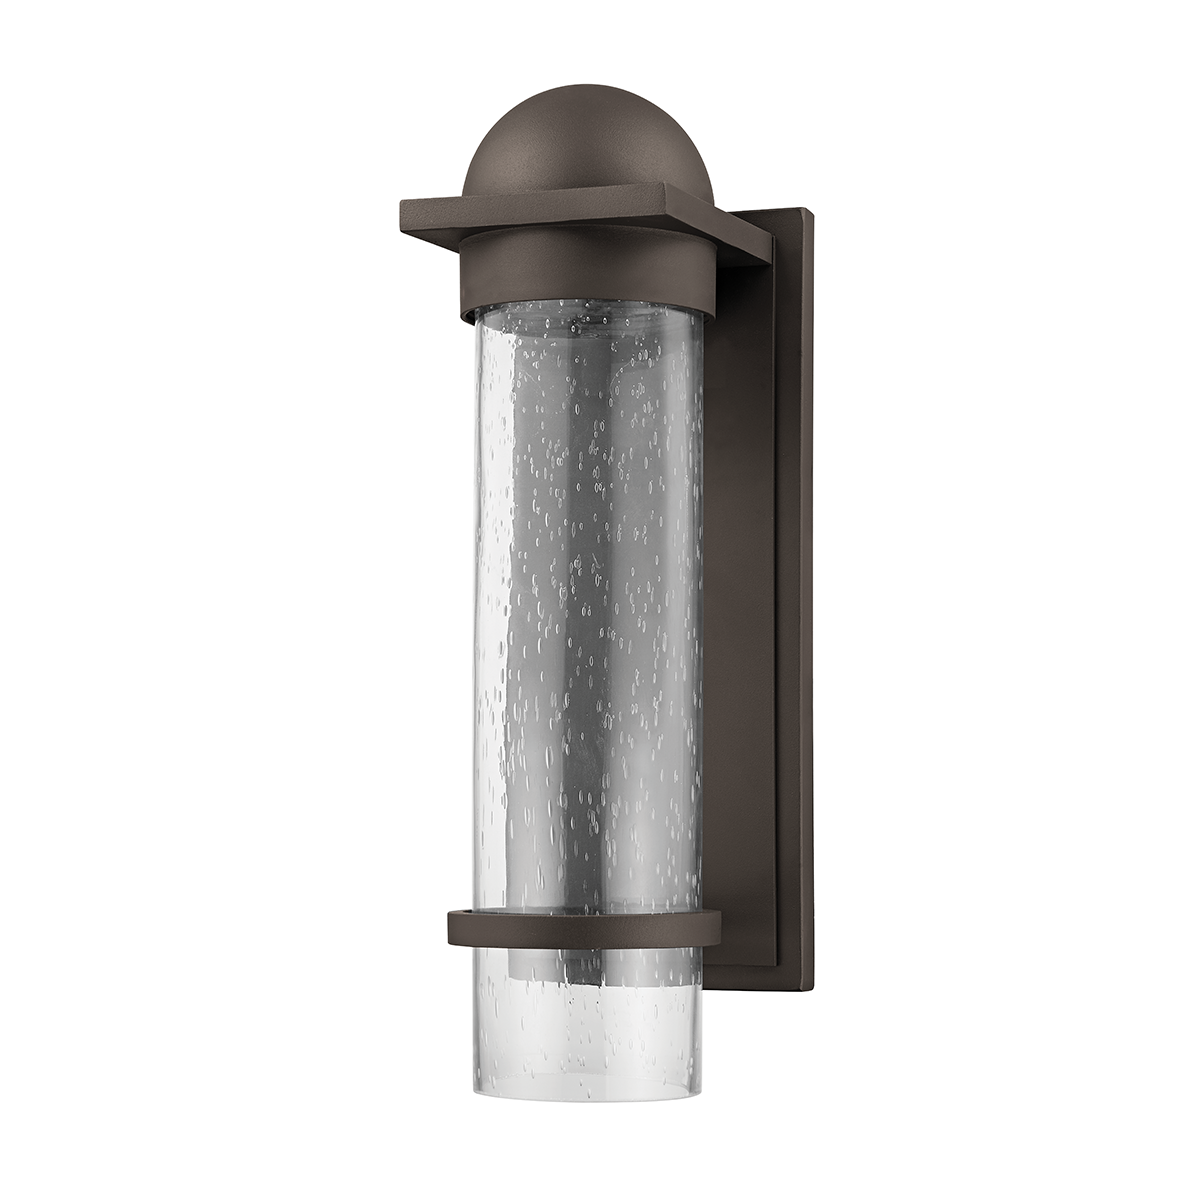 Troy NERO 1 LIGHT LARGE EXTERIOR WALL SCONCE B7116 Outdoor l Wall Troy Lighting TEXTURED BRONZE  